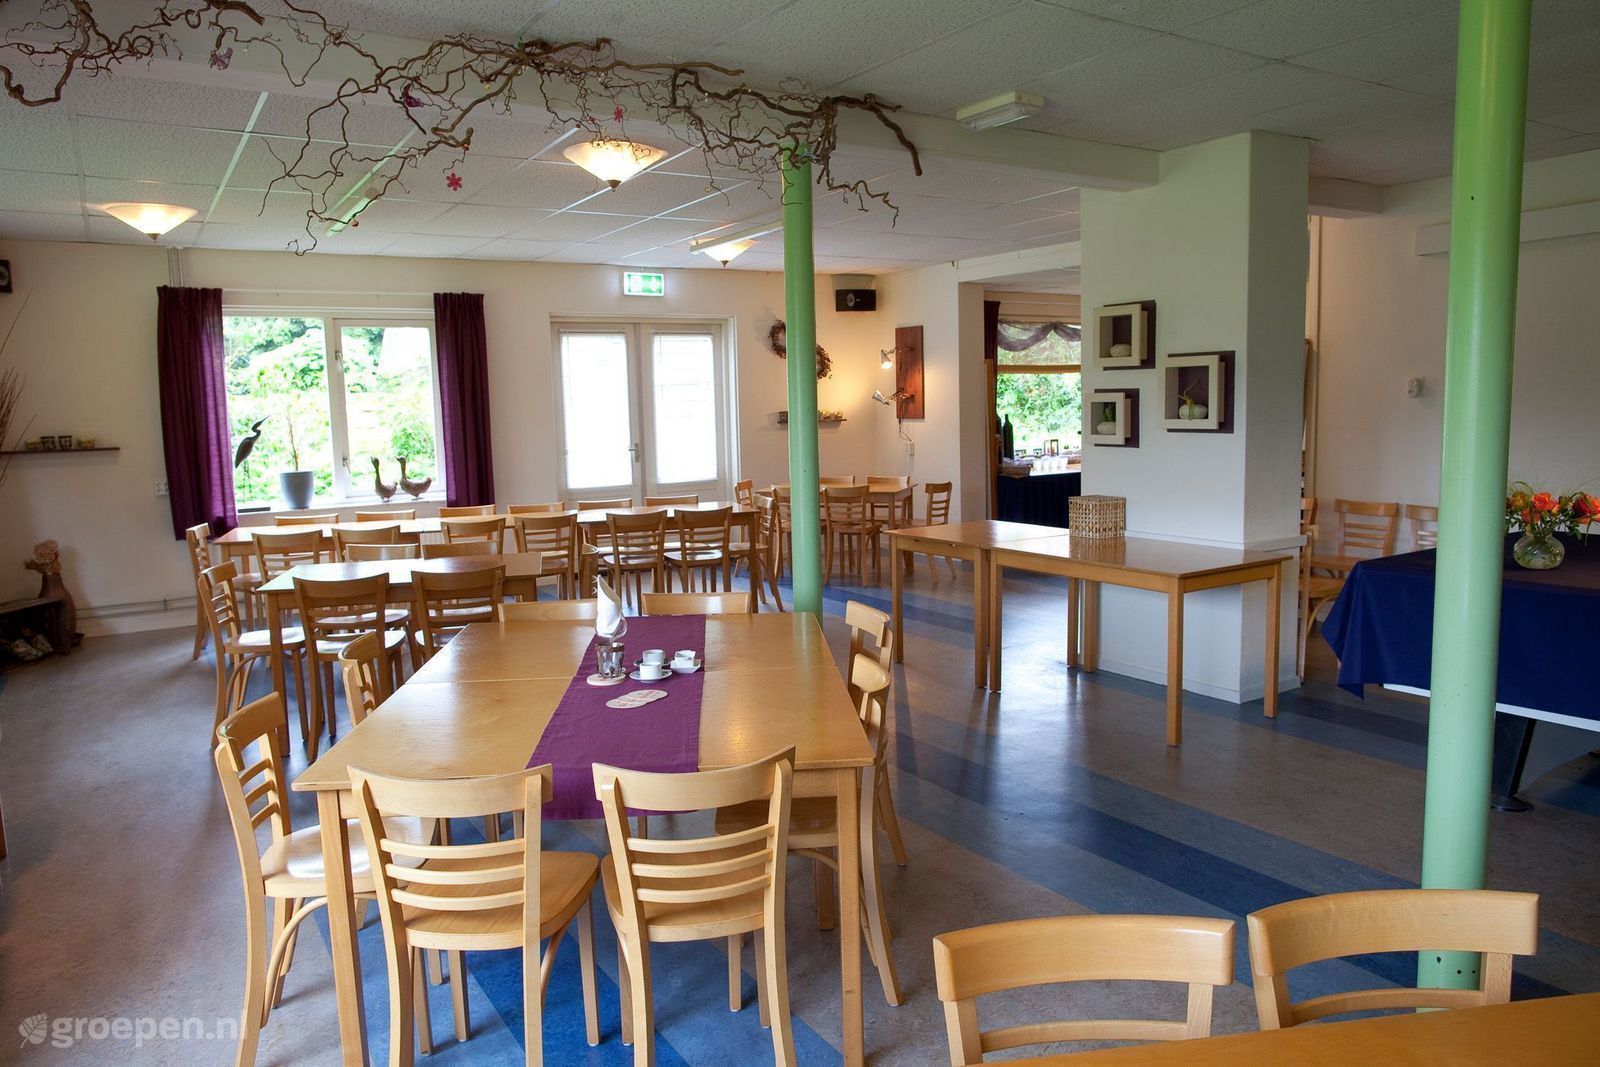 Group accommodation Meppel